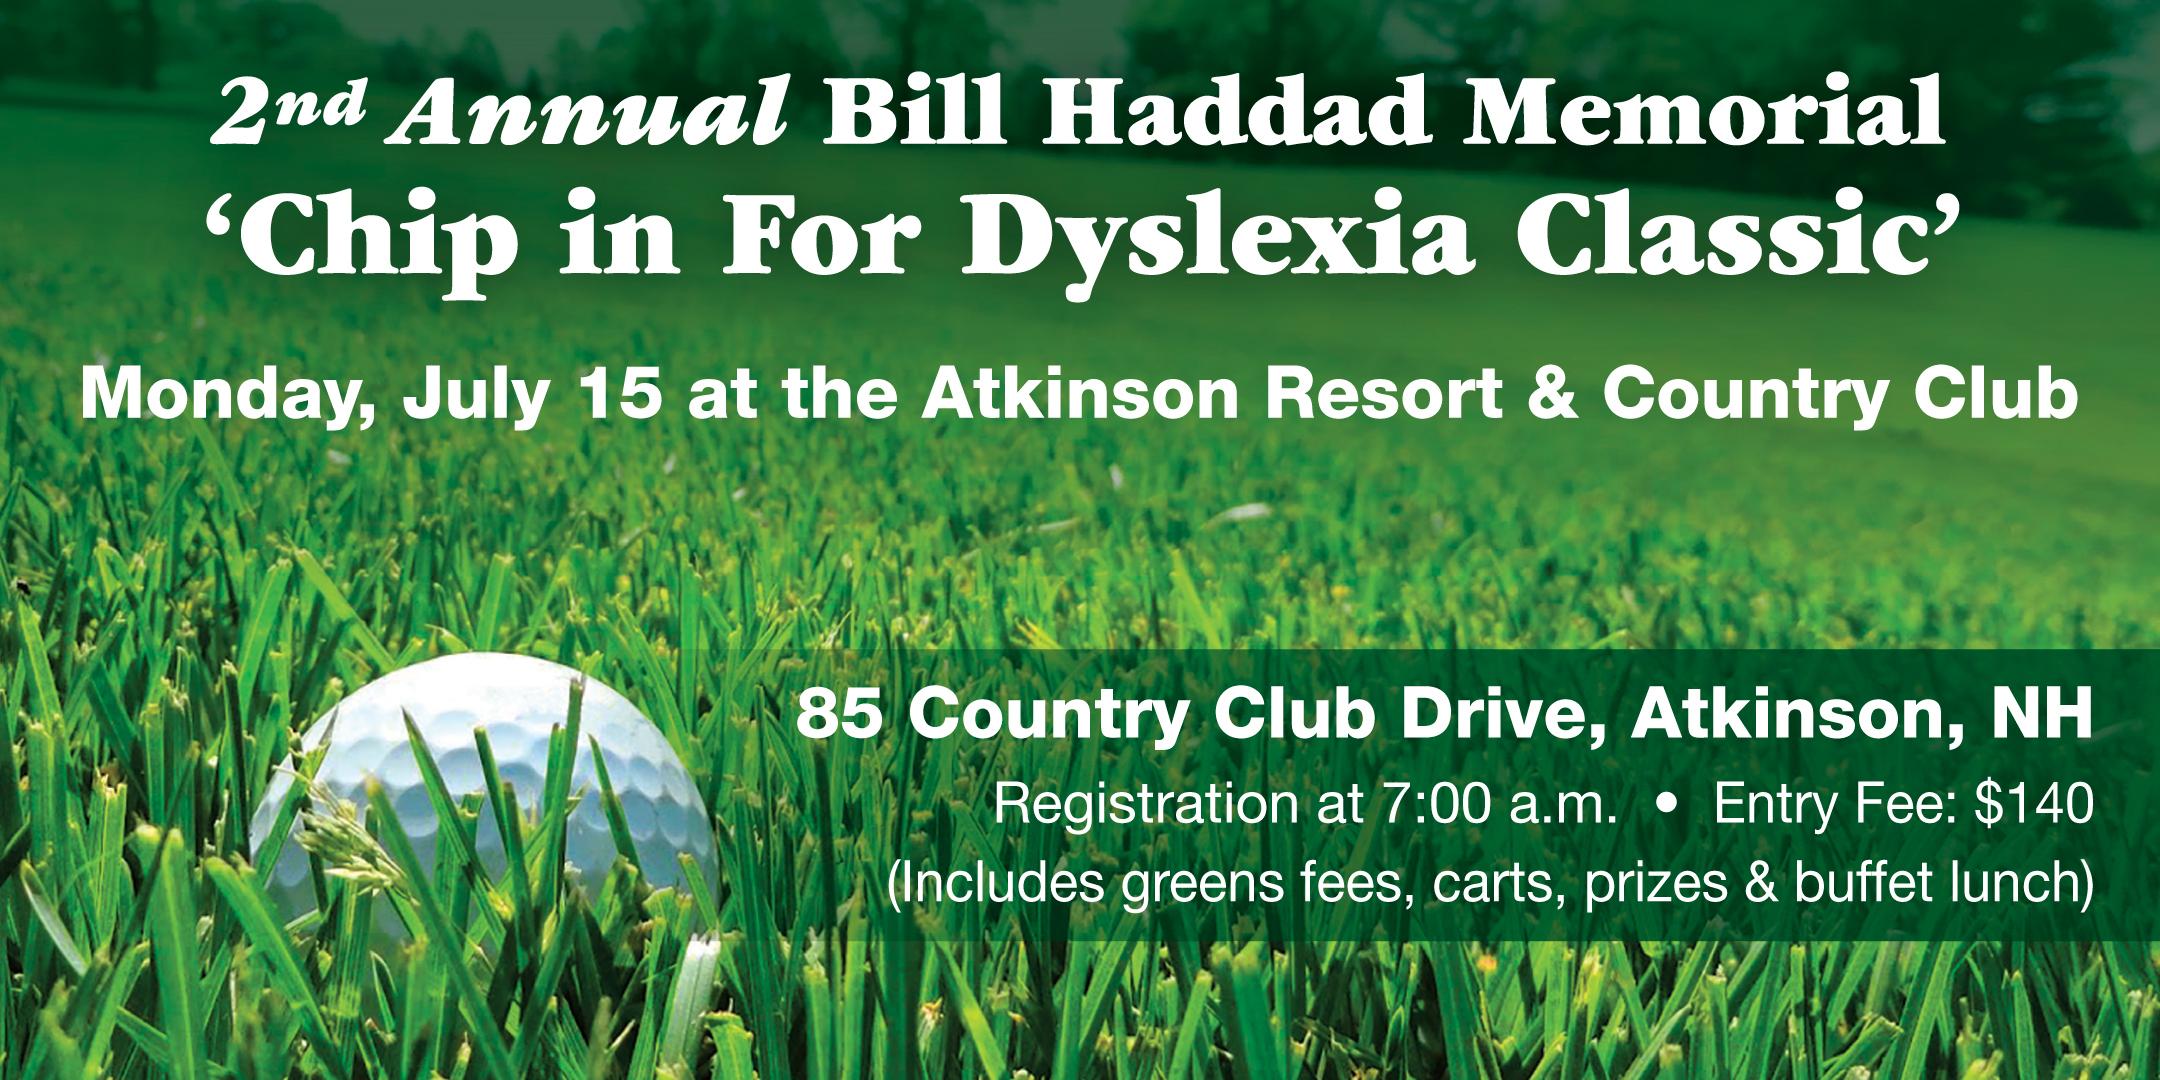 2nd Annual Bill Haddad "Chip in for Dyslexia" Golf Tournament